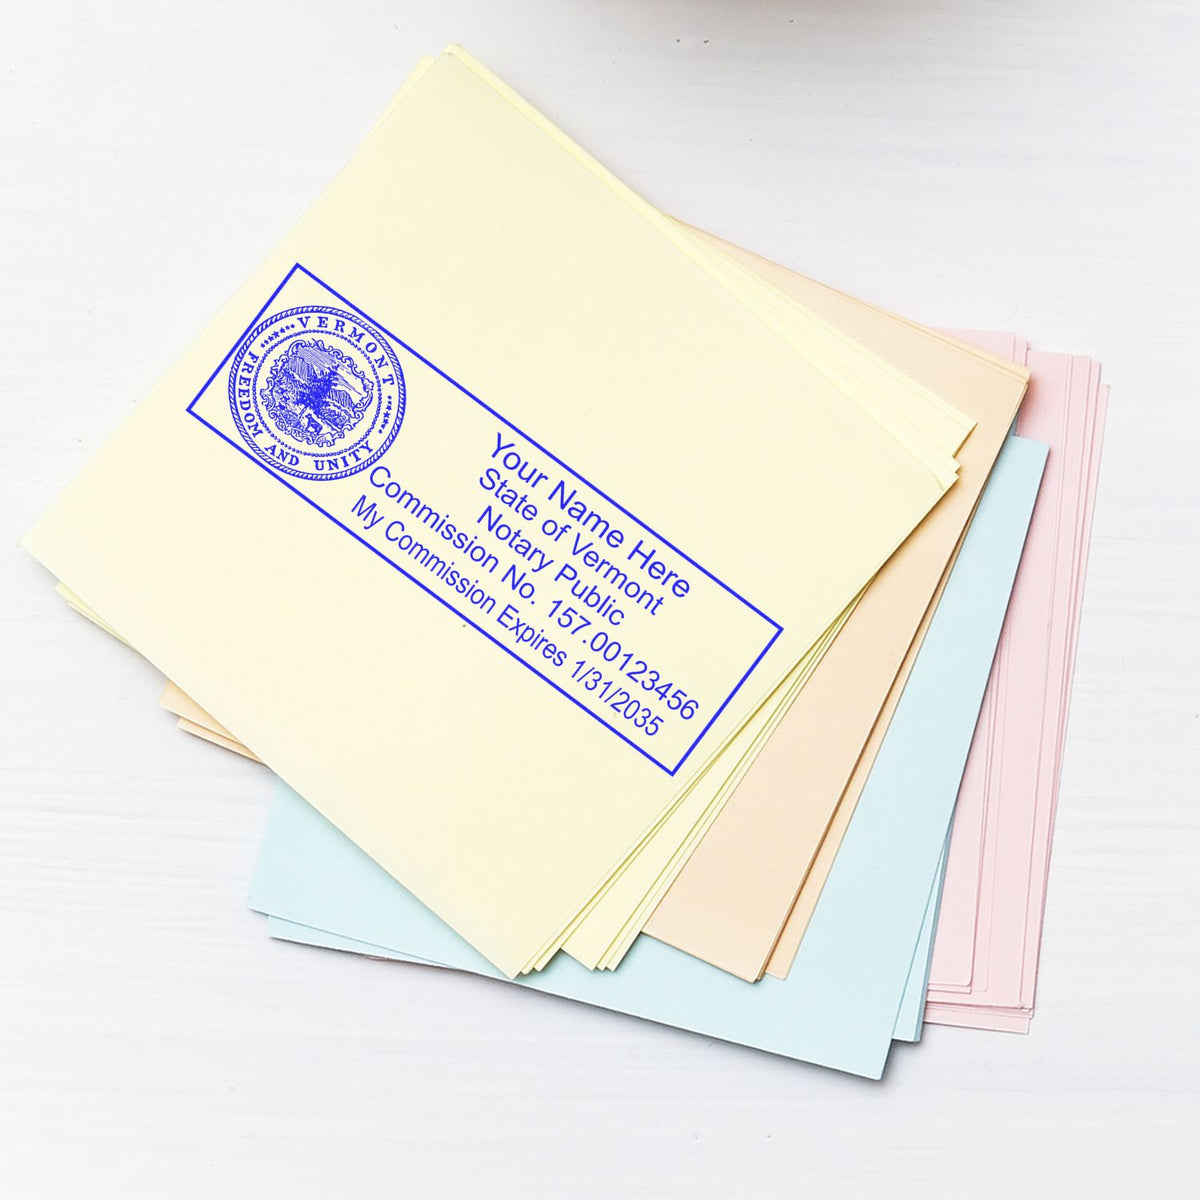 This paper is stamped with a sample imprint of the Wooden Handle Vermont State Seal Notary Public Stamp, signifying its quality and reliability.